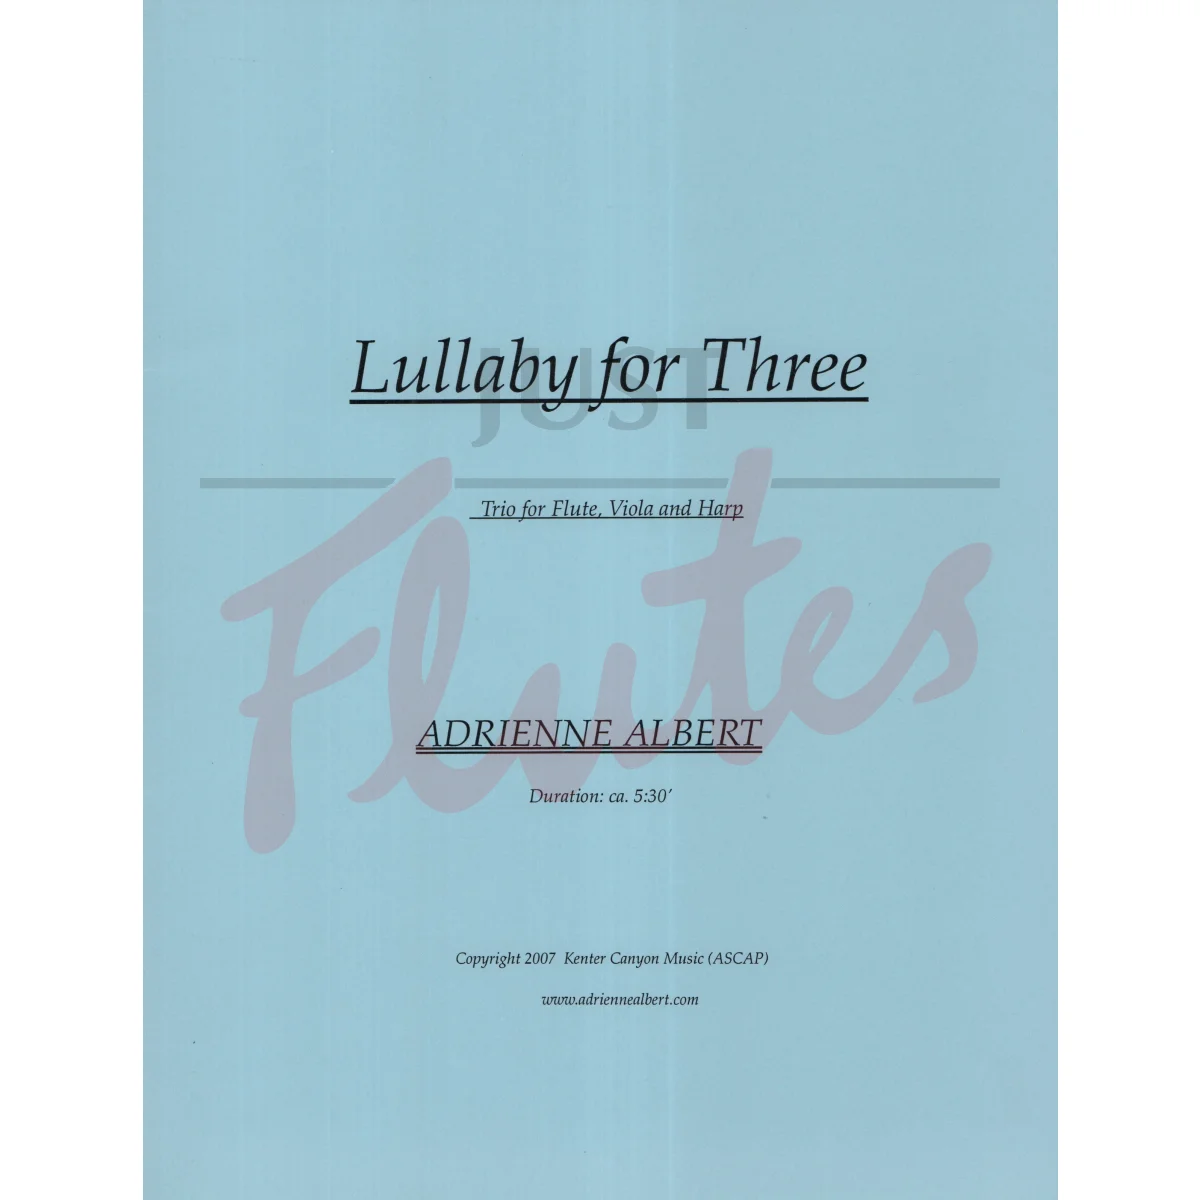 Lullaby for Three for Flute, Viola and Harp